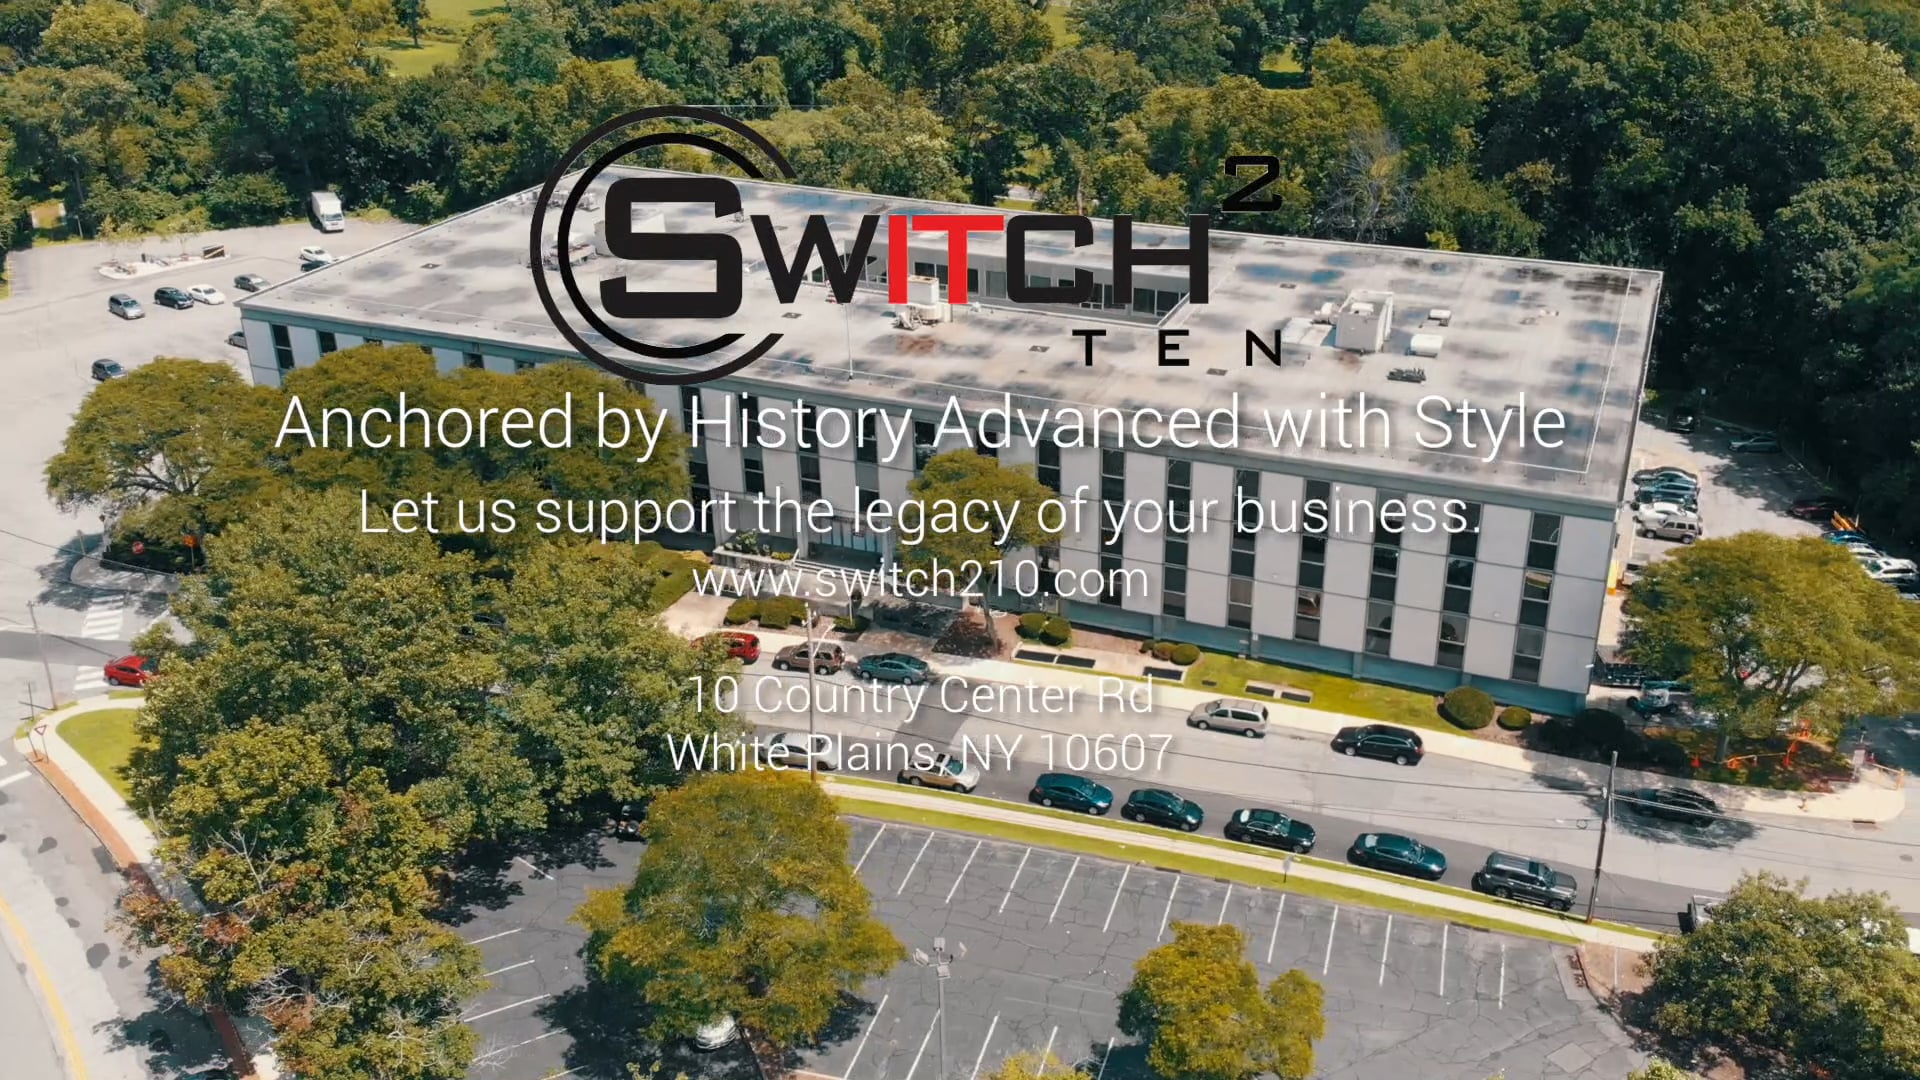 Switch210 host New York's weight lifting championship